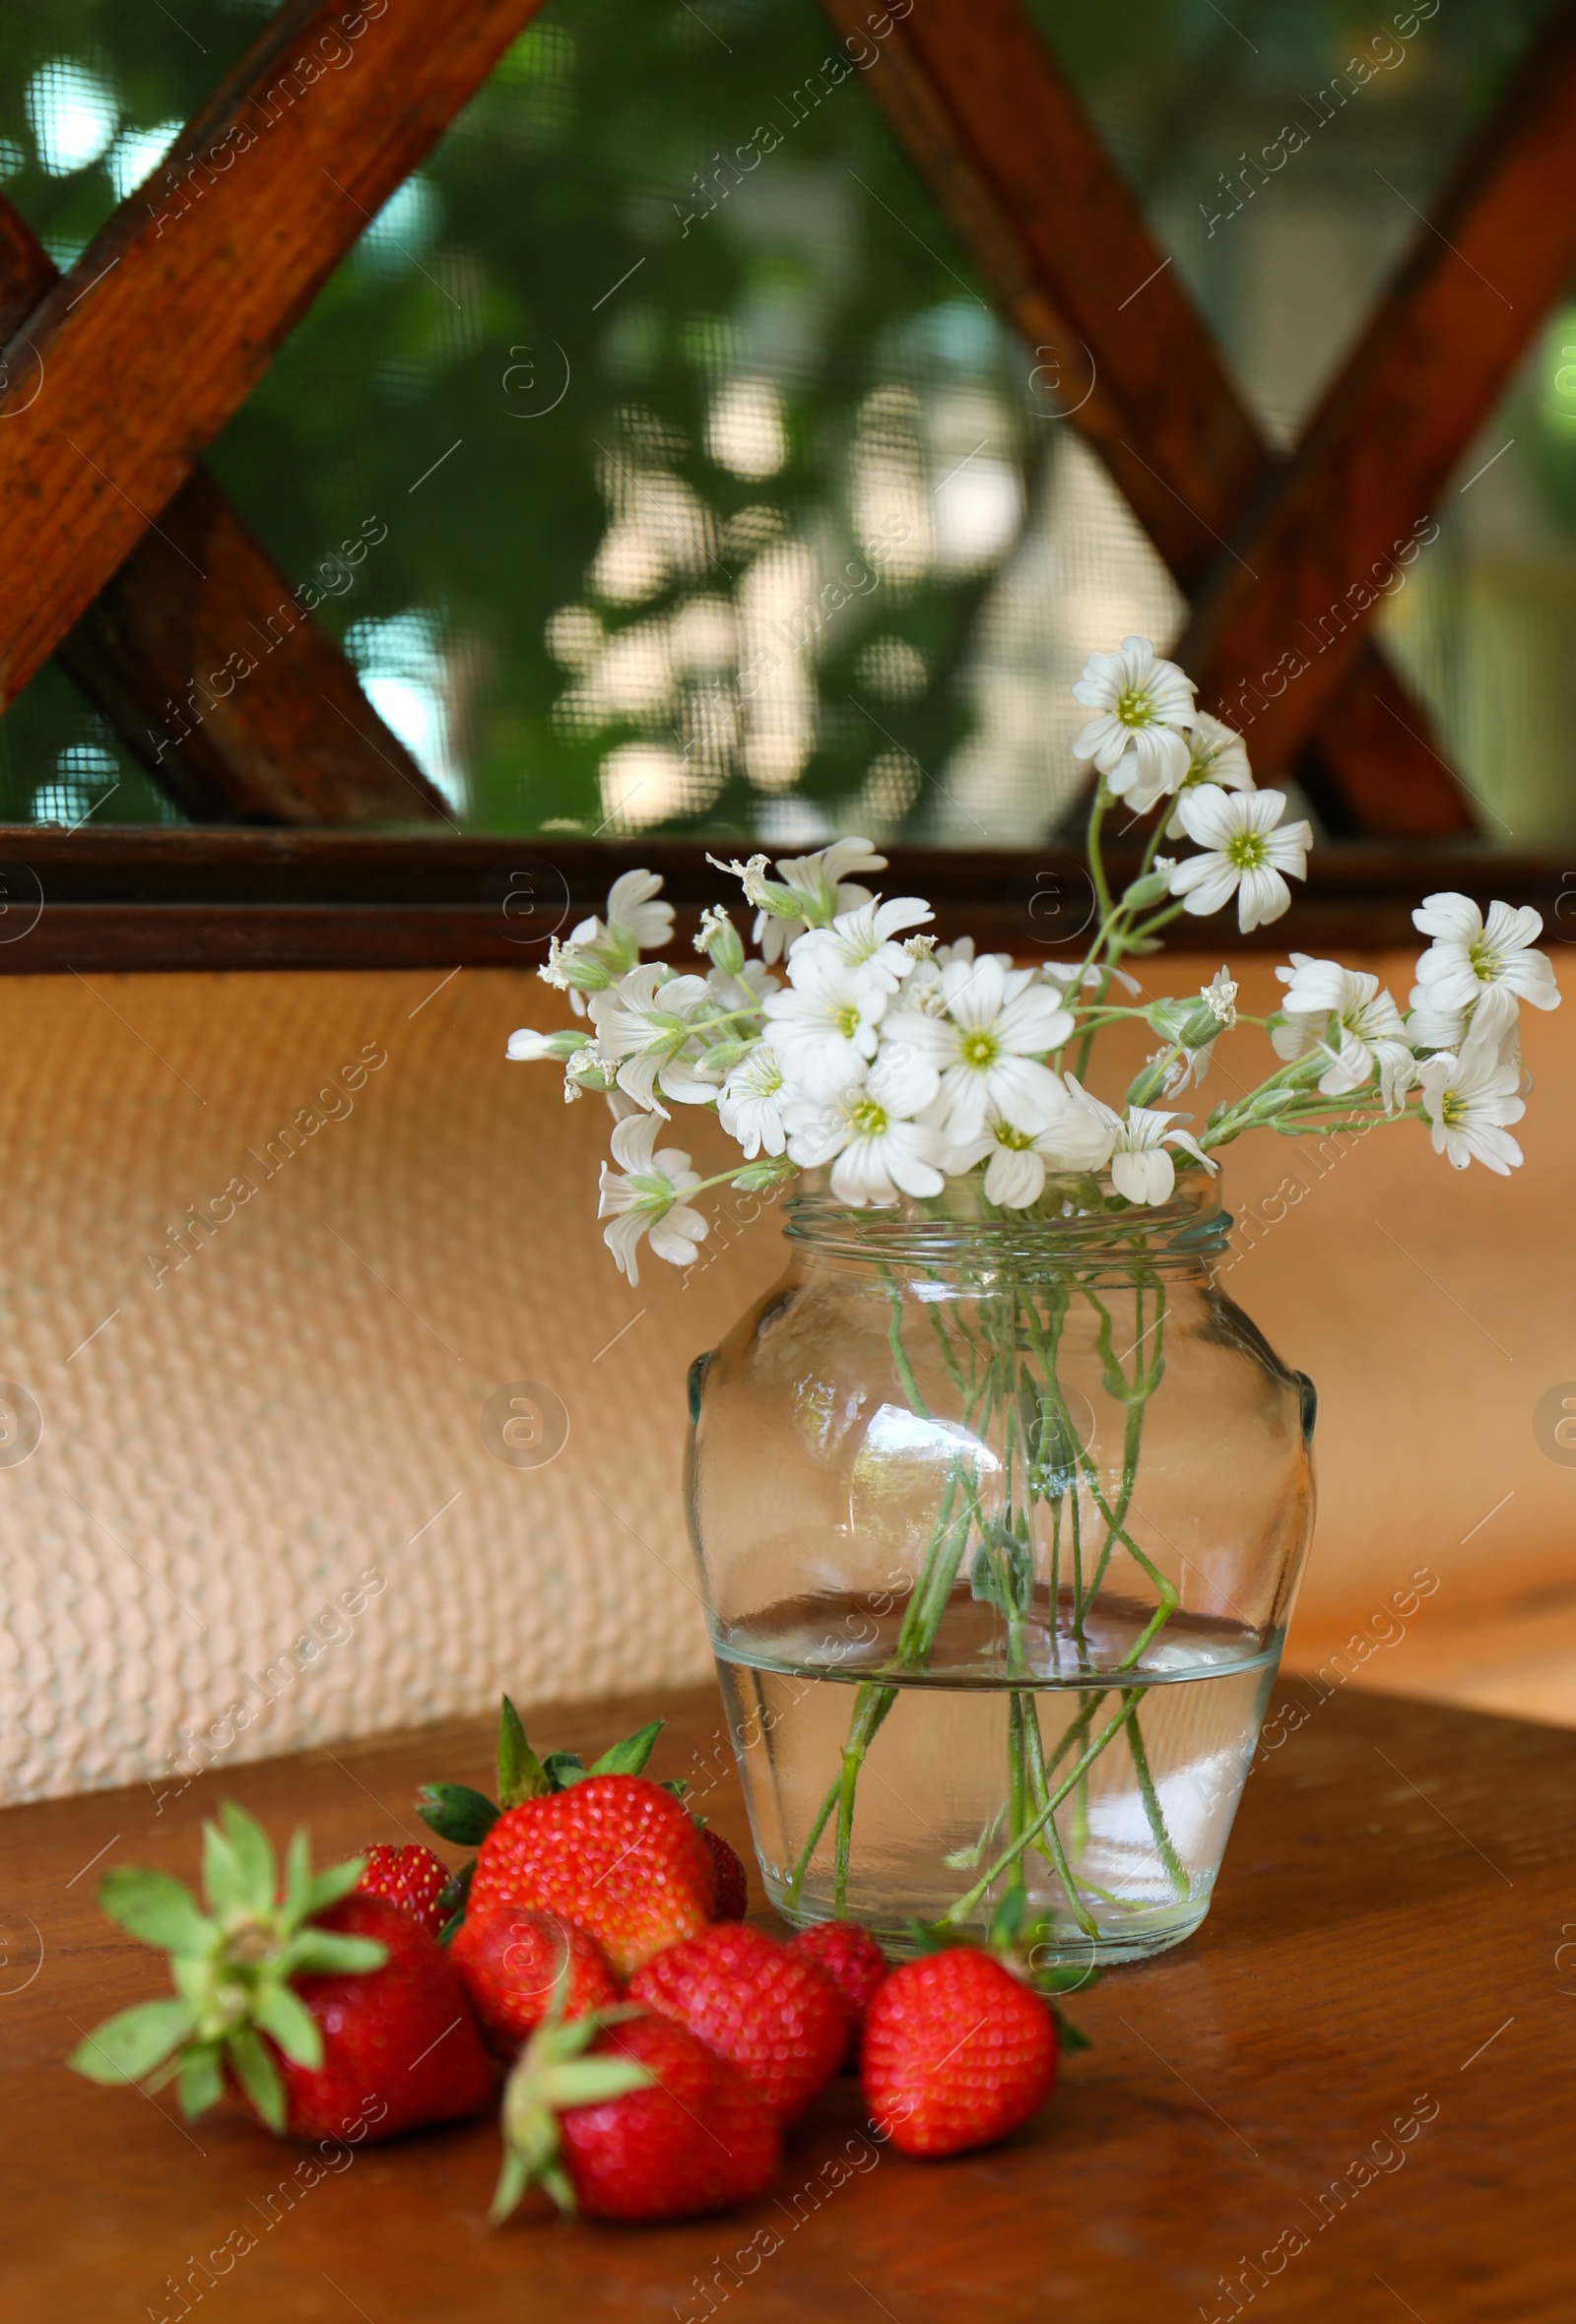 Photo of Fresh strawberries and bouquet of beautiful white flowers on wooden table